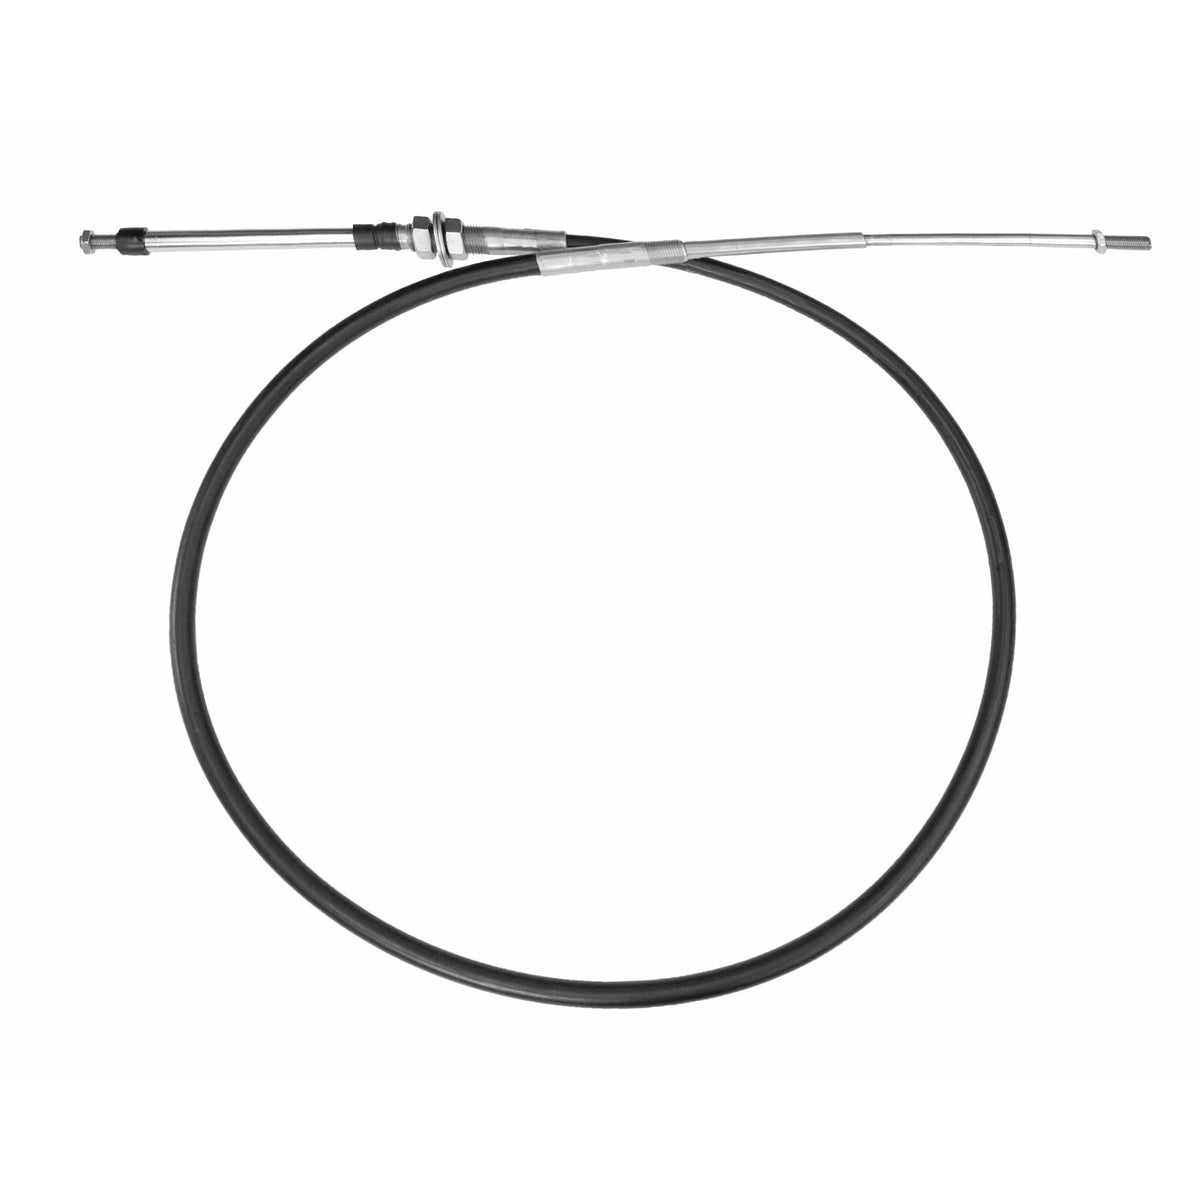 Teleflex Not Qualified for Free Shipping Teleflex Jet Boat Steering Cable 16' #SSC21916